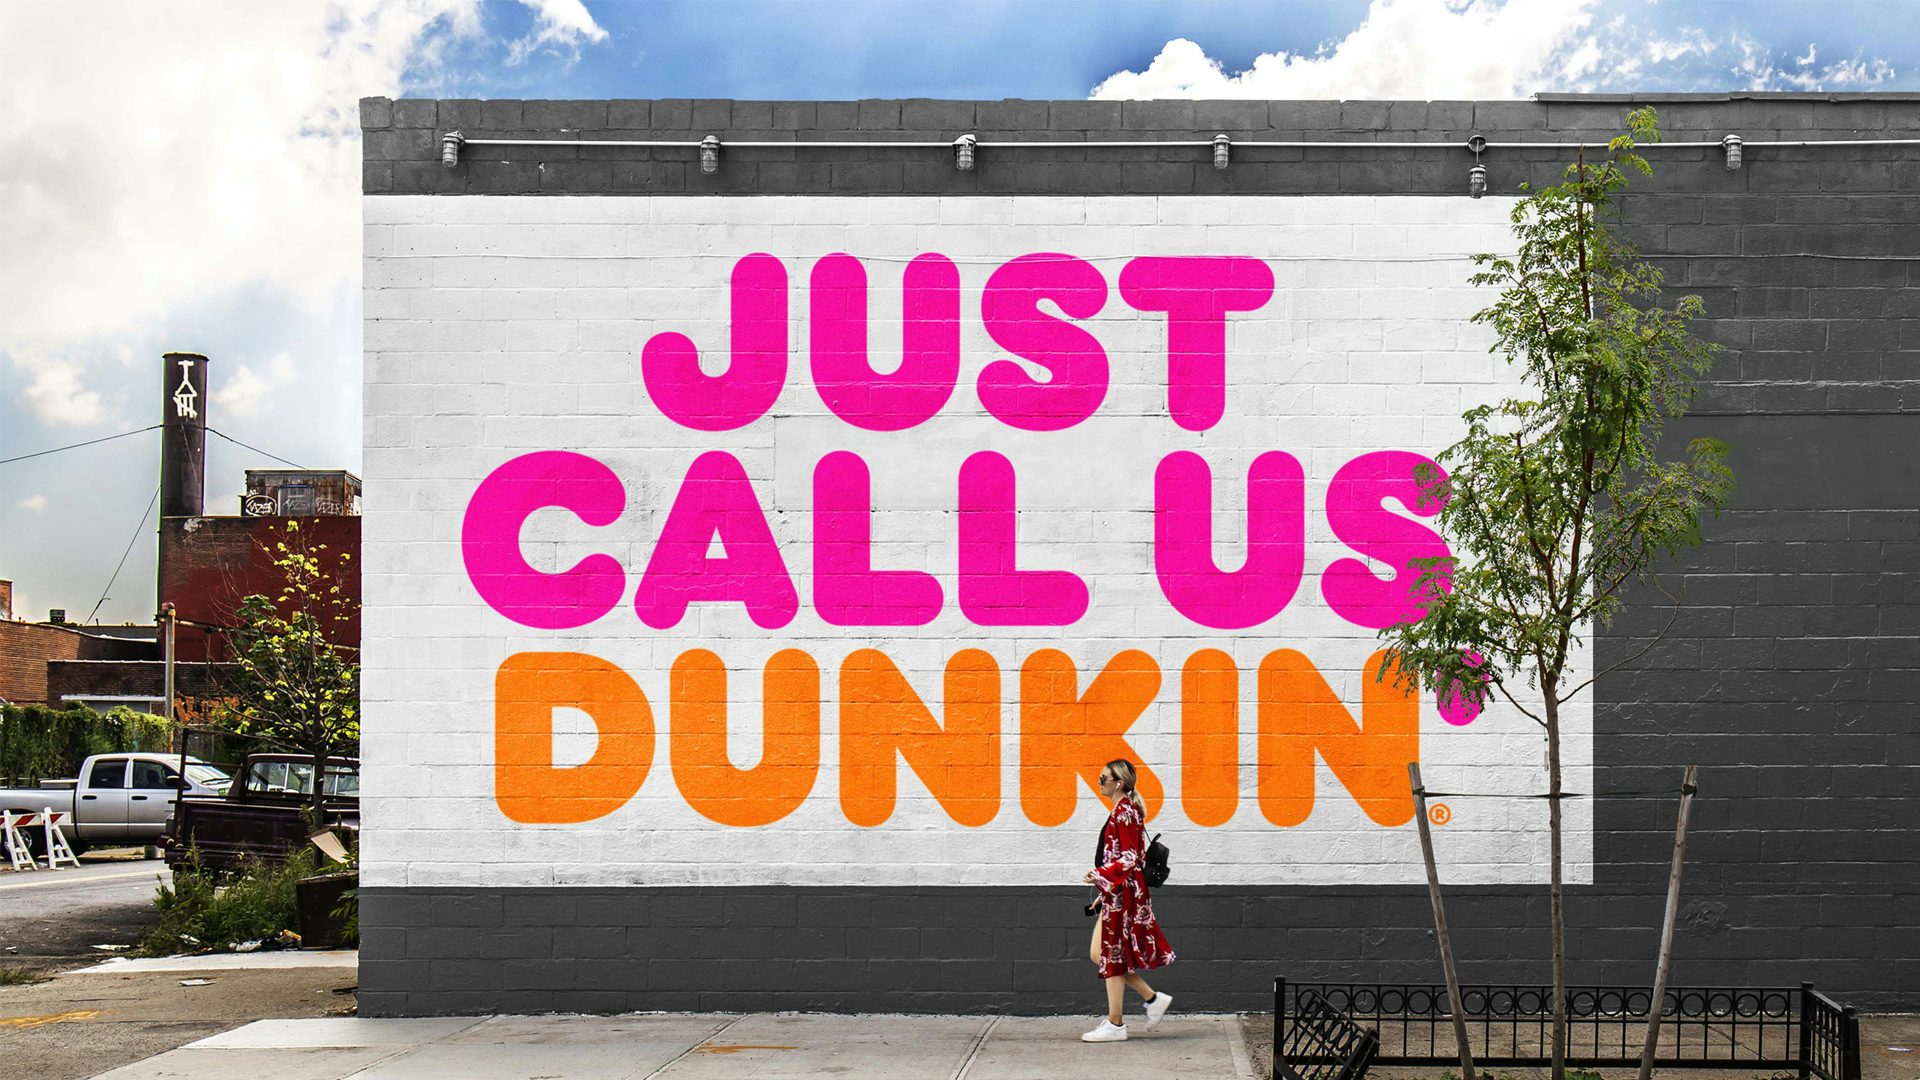 Image of the Dunkin brand identity by JKR